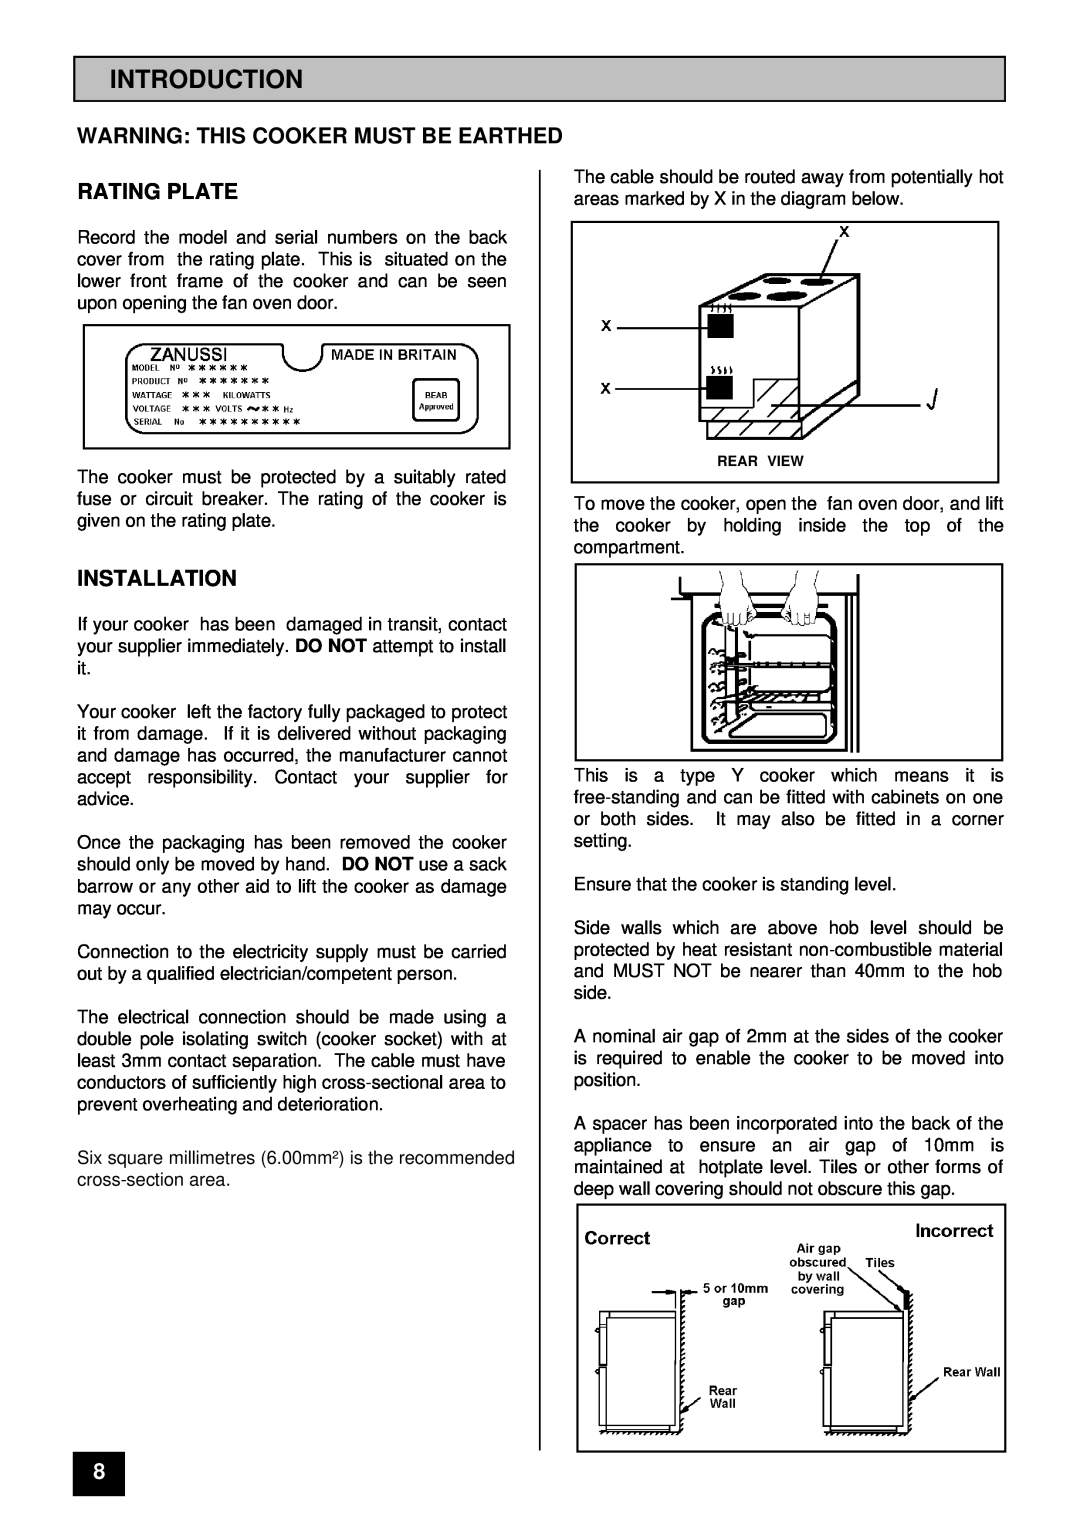 Zanussi ZCE 7400 manual Introduction, Warning This Cooker Must Be Earthed Rating Plate, Installation 